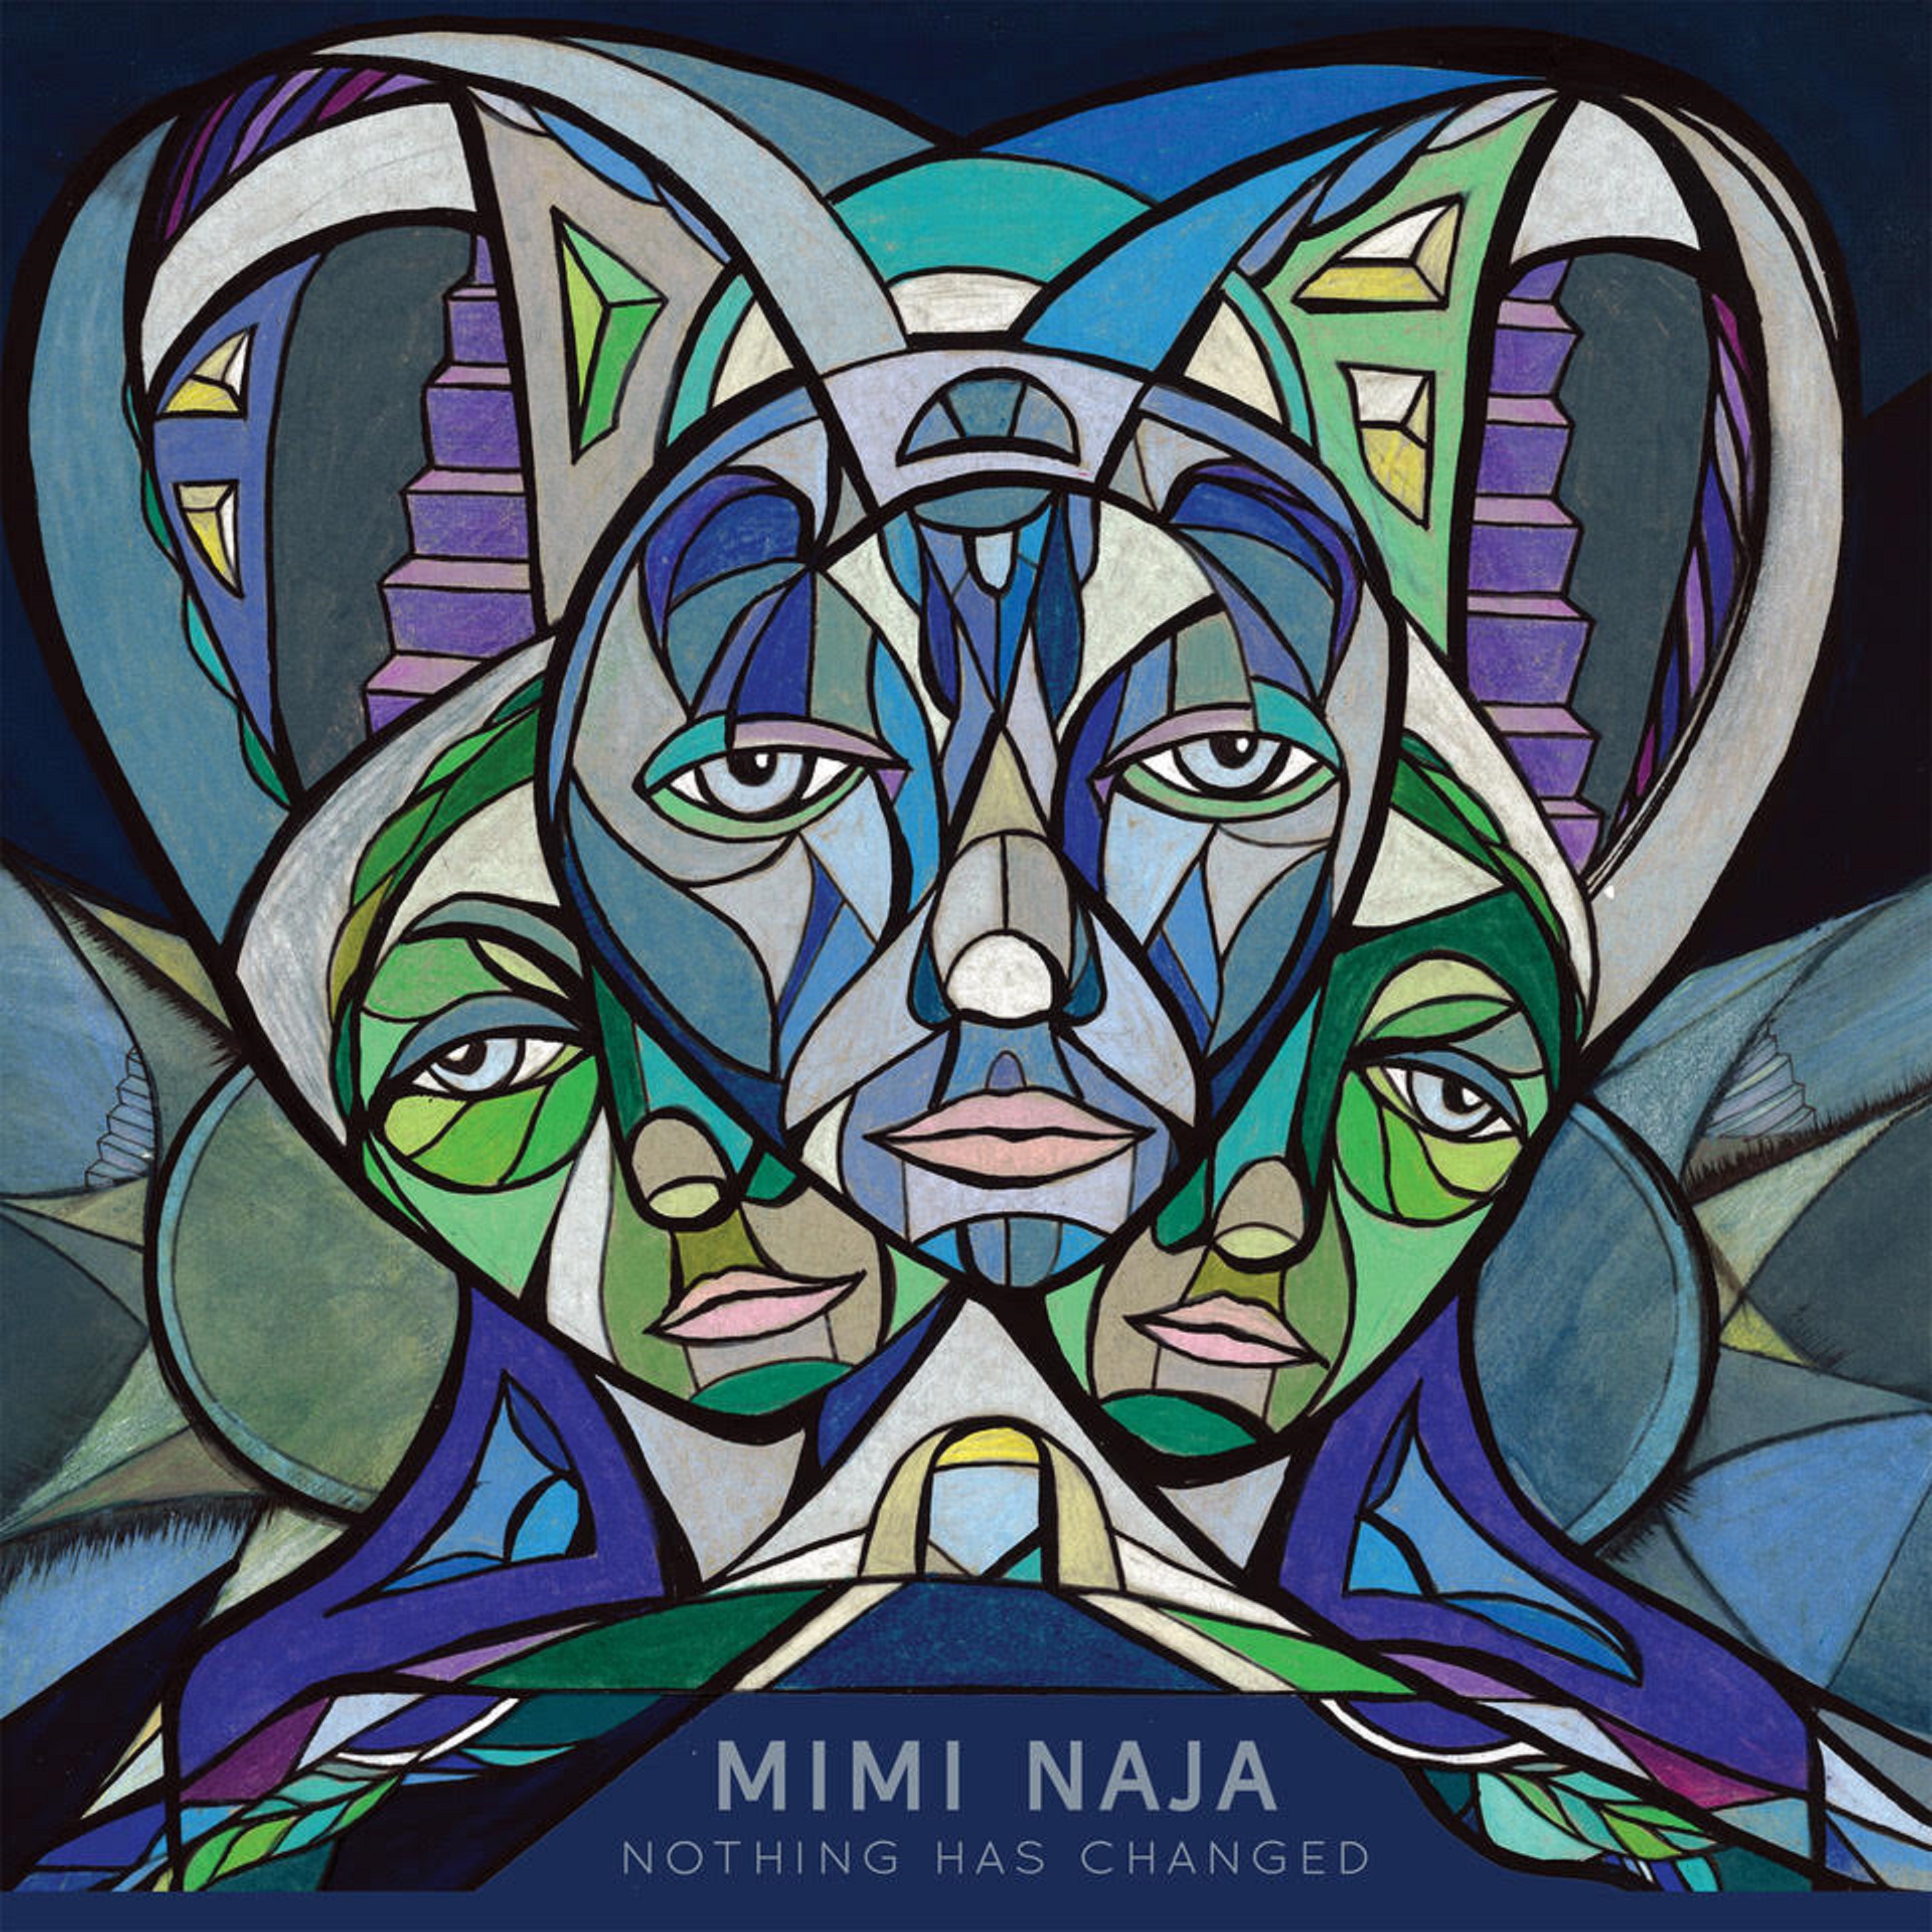 Mimi Naja's new EP Out Today, Live stream from Nashville's Purple Building Tonight